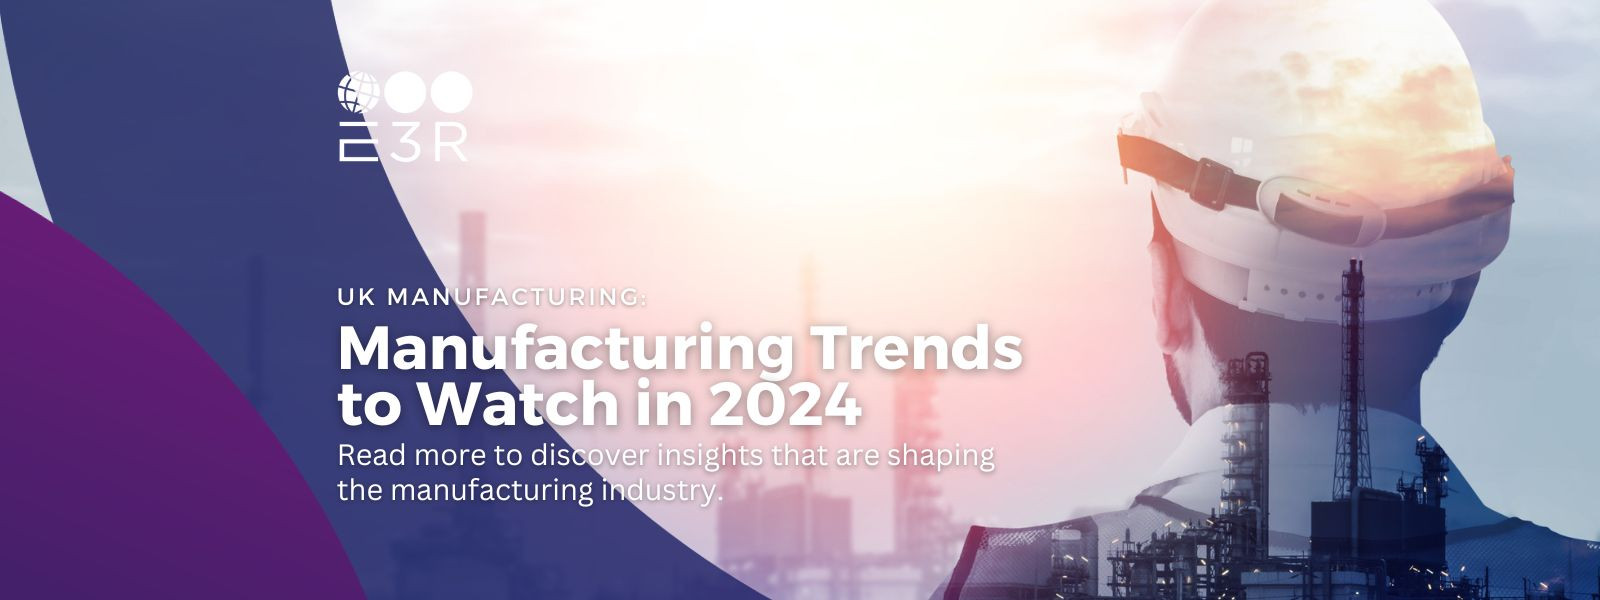 Top 5 Manufacturing Trends to Watch in 2024